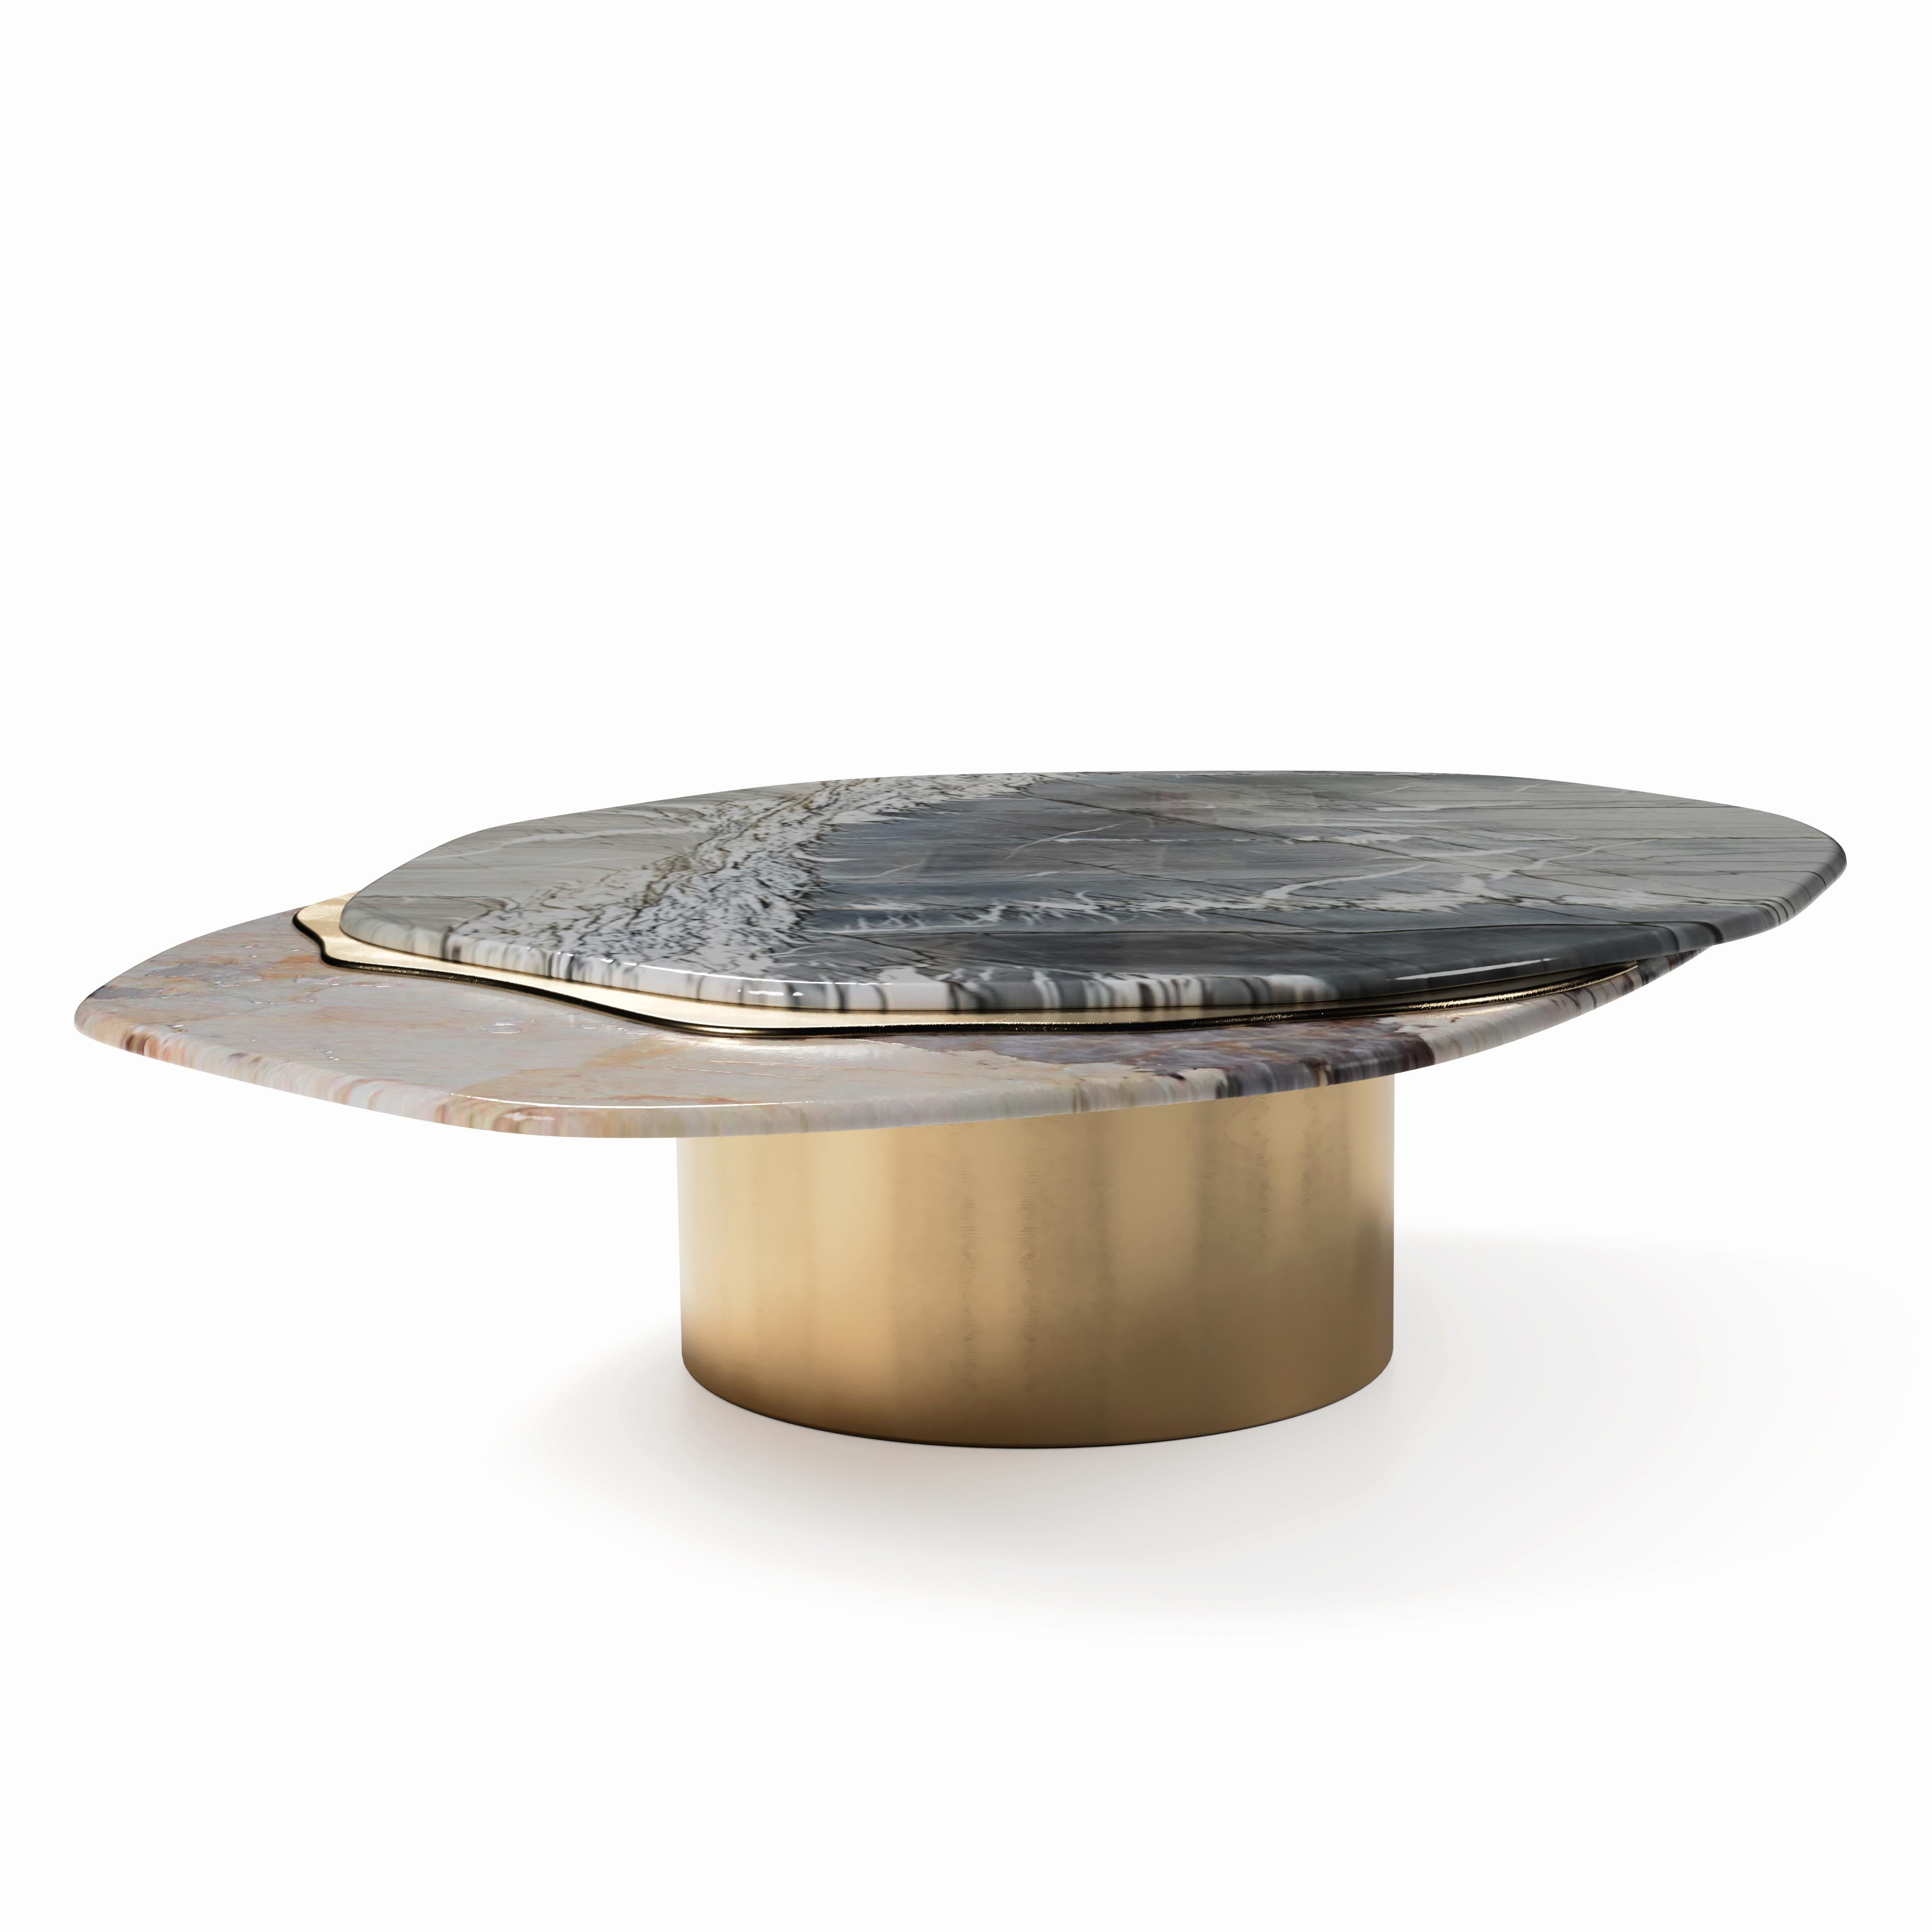 Contemporary The Elements VII Coffee Table, 1 of 1 by Grzegorz Majka